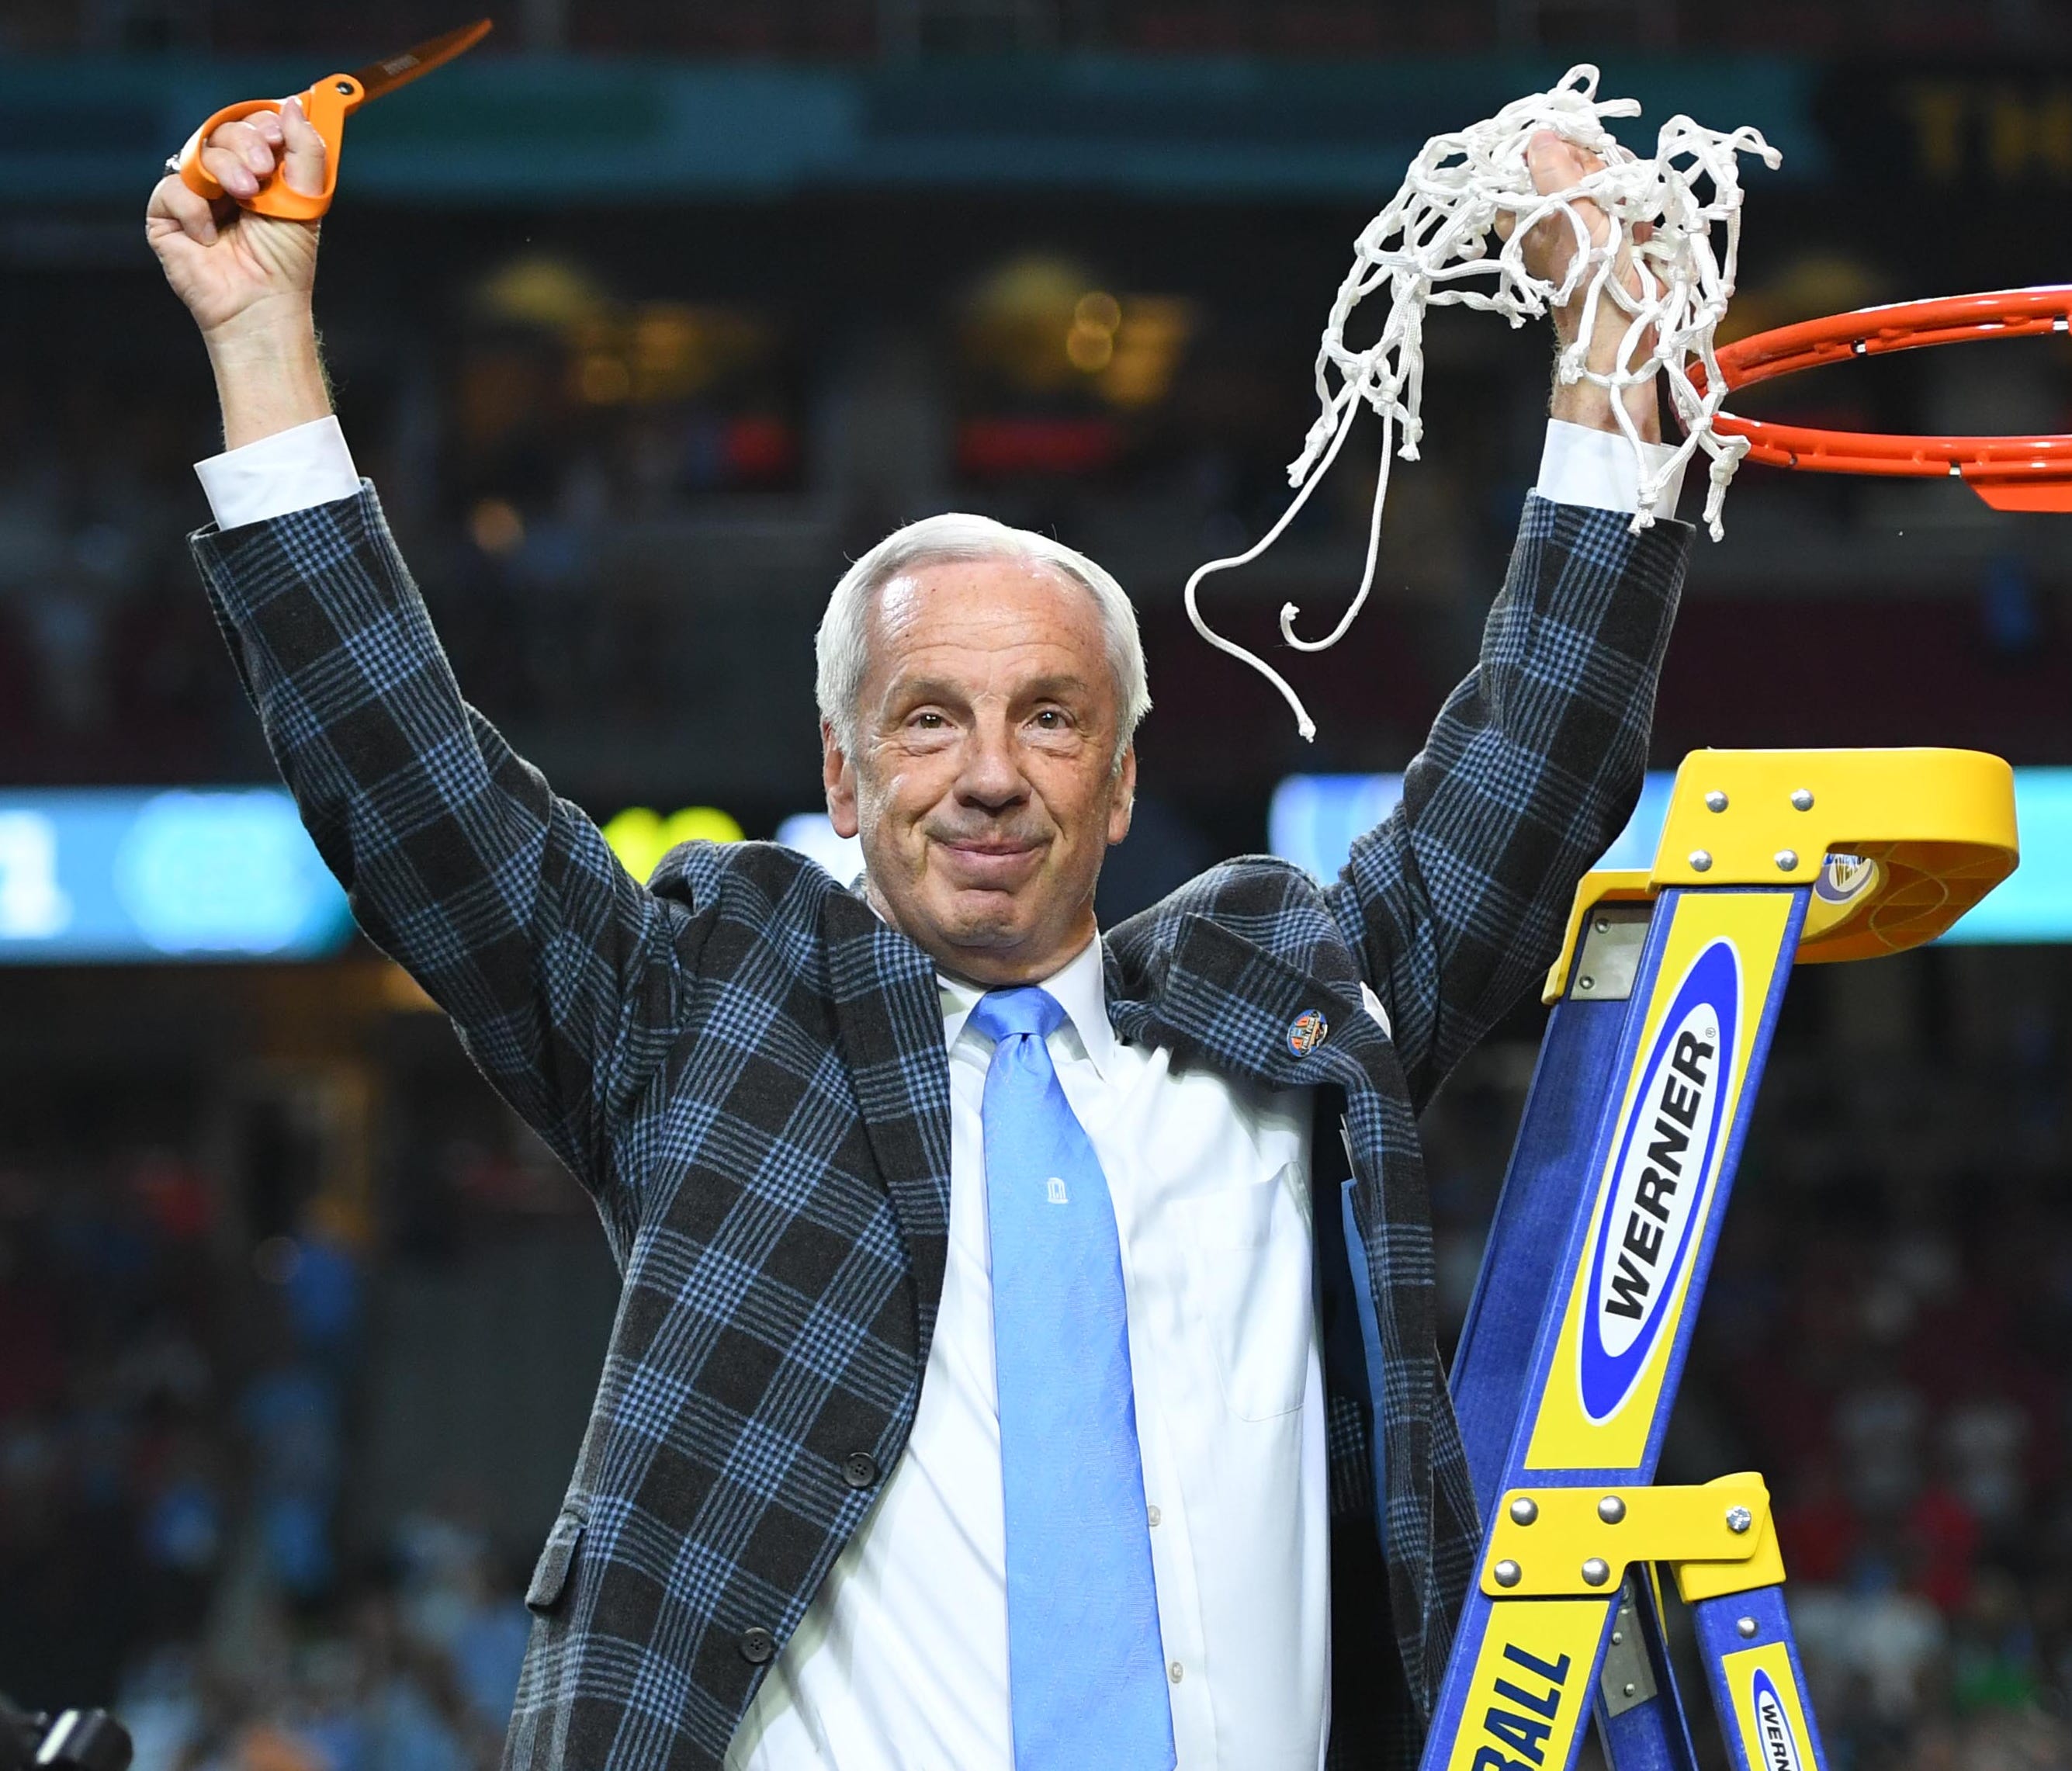 North Carolina Tar Heels head coach Roy Williams cuts down the net after defeating the Gonzaga Bulldogs in the championship game of the 2017 NCAA Men's Final Four at University of Phoenix Stadium.